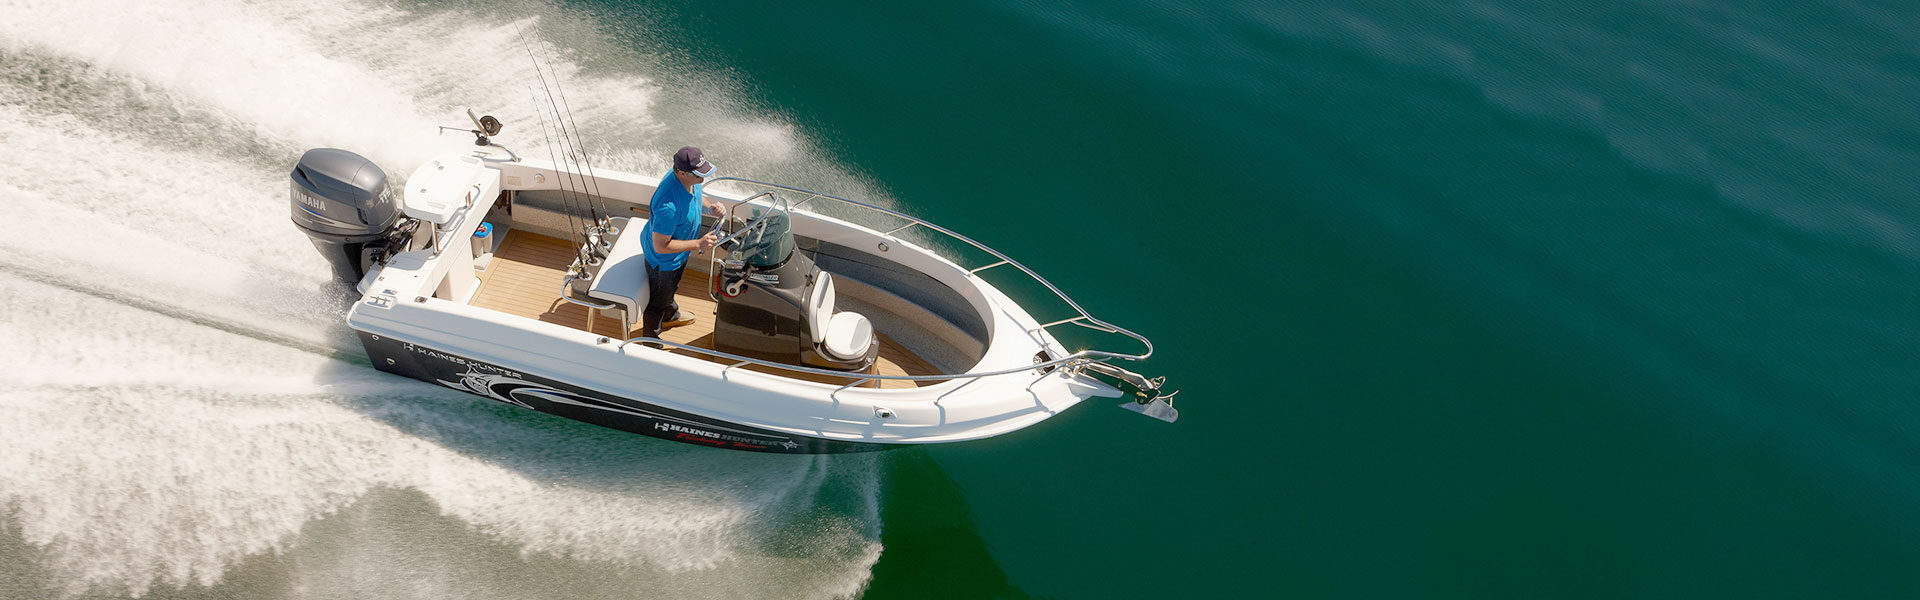 Trailer Boat Tests The Haines Hunter 625 Offshore